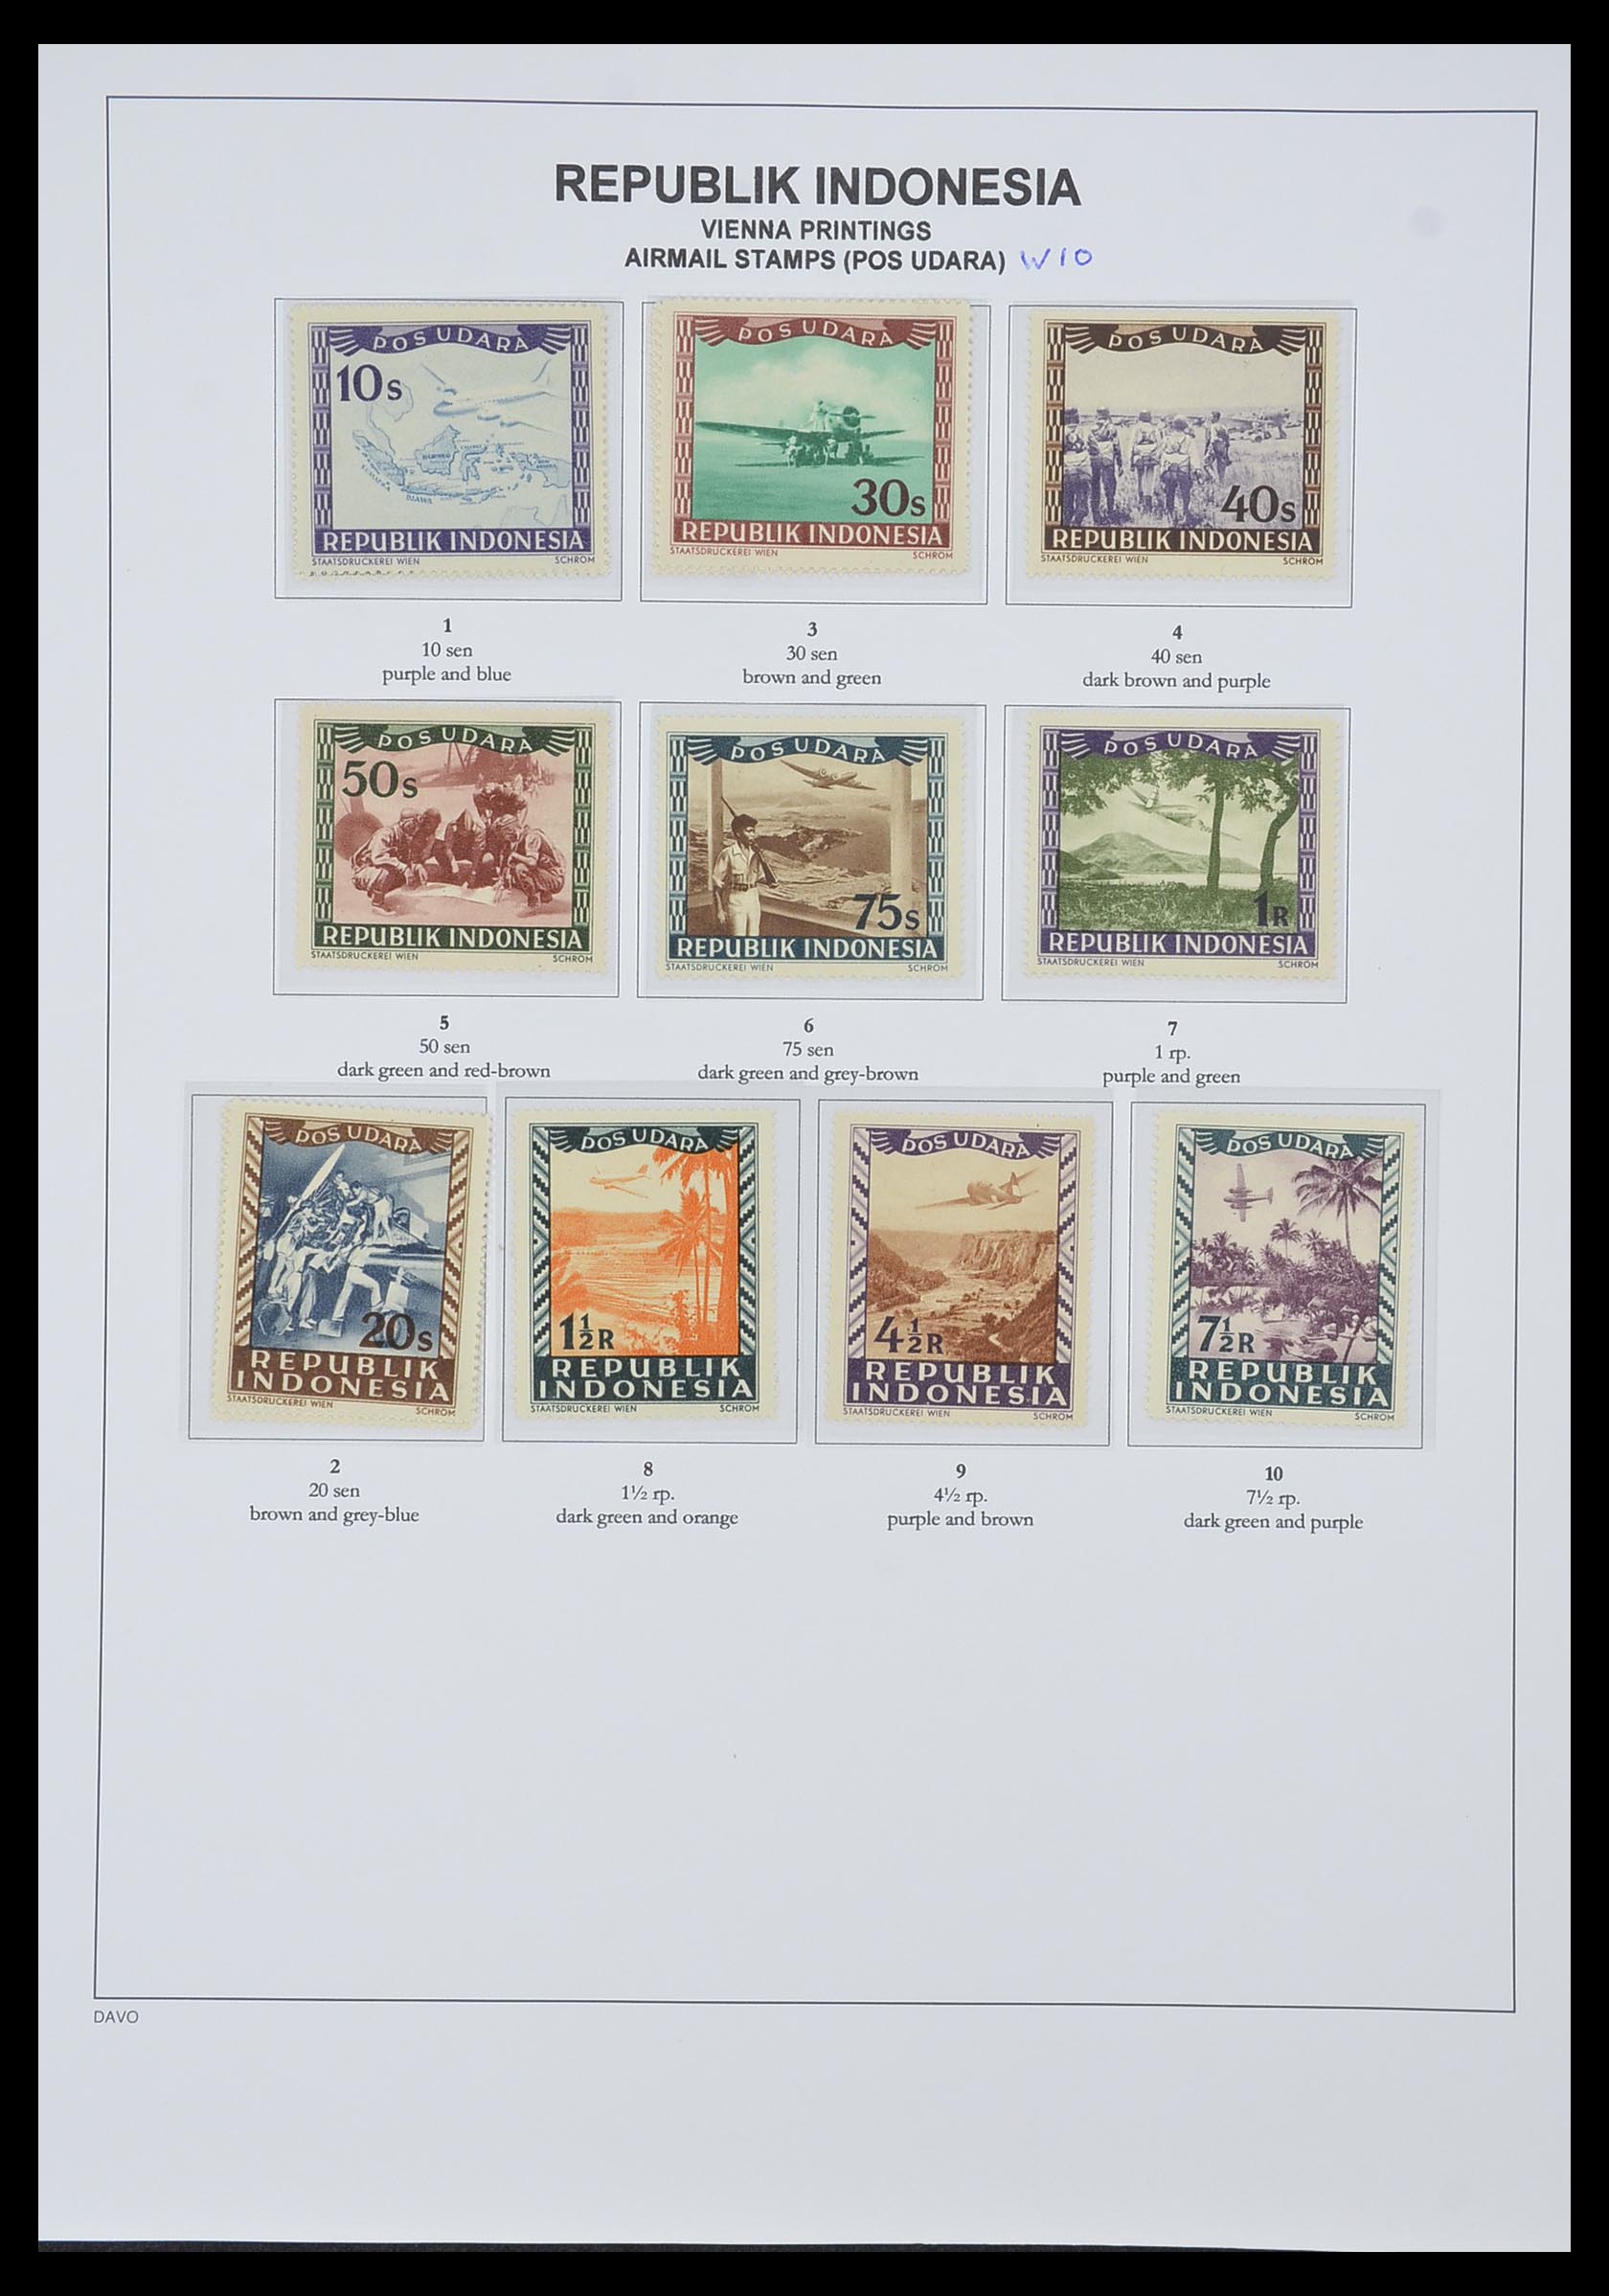 33988 021 - Stamp collection 33988 Vienna printings Indonesia.